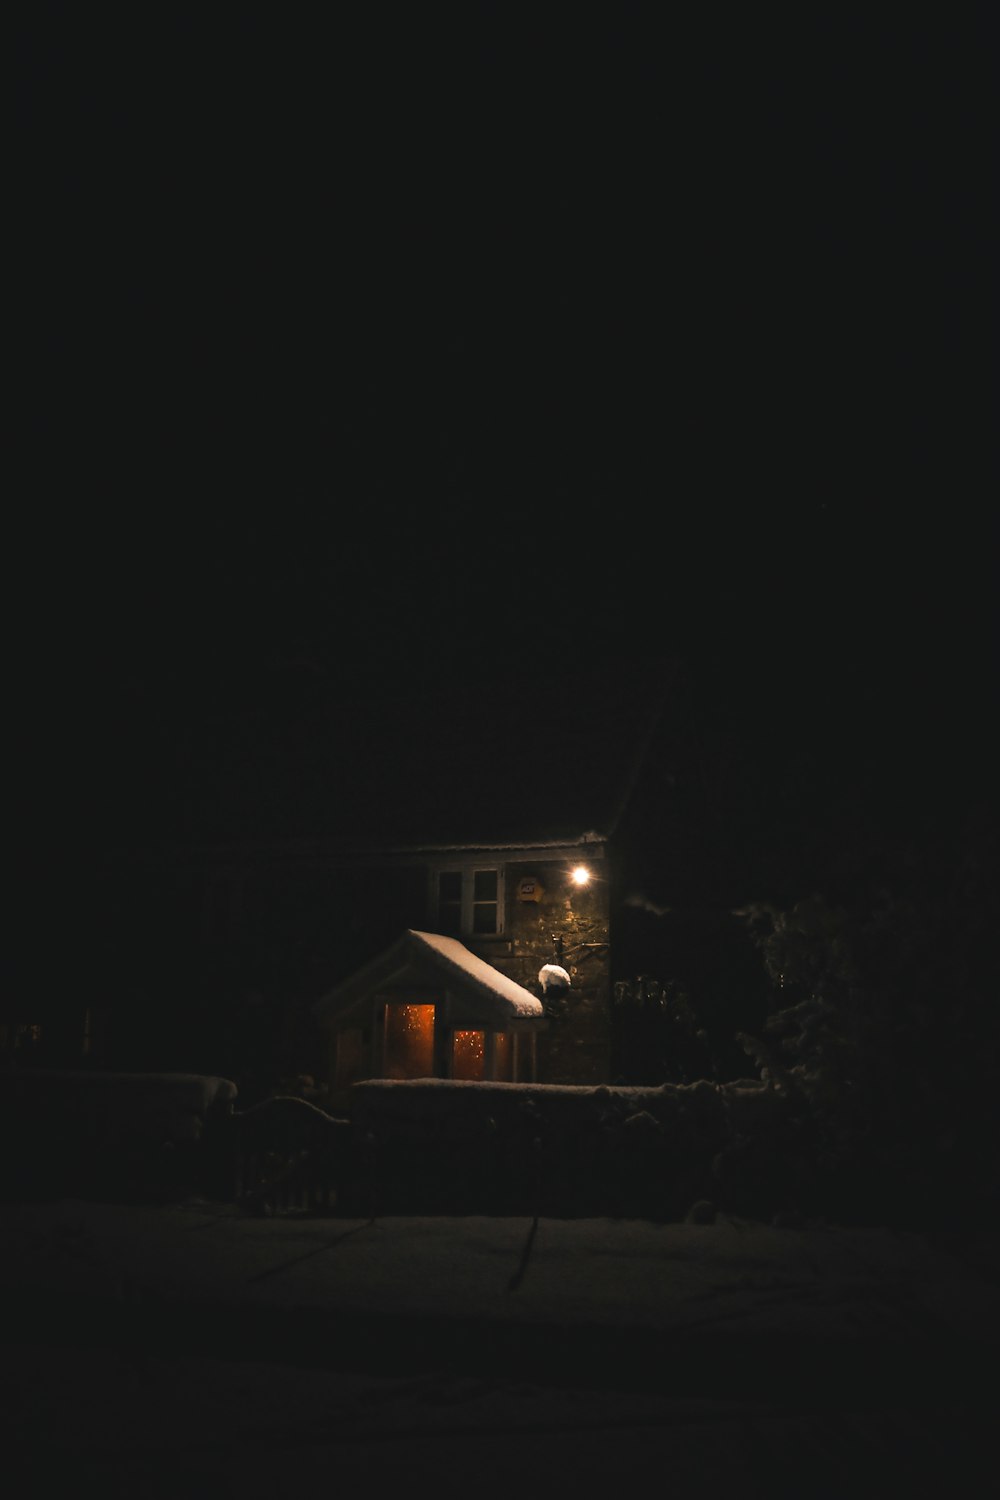 a house is lit up at night in the dark